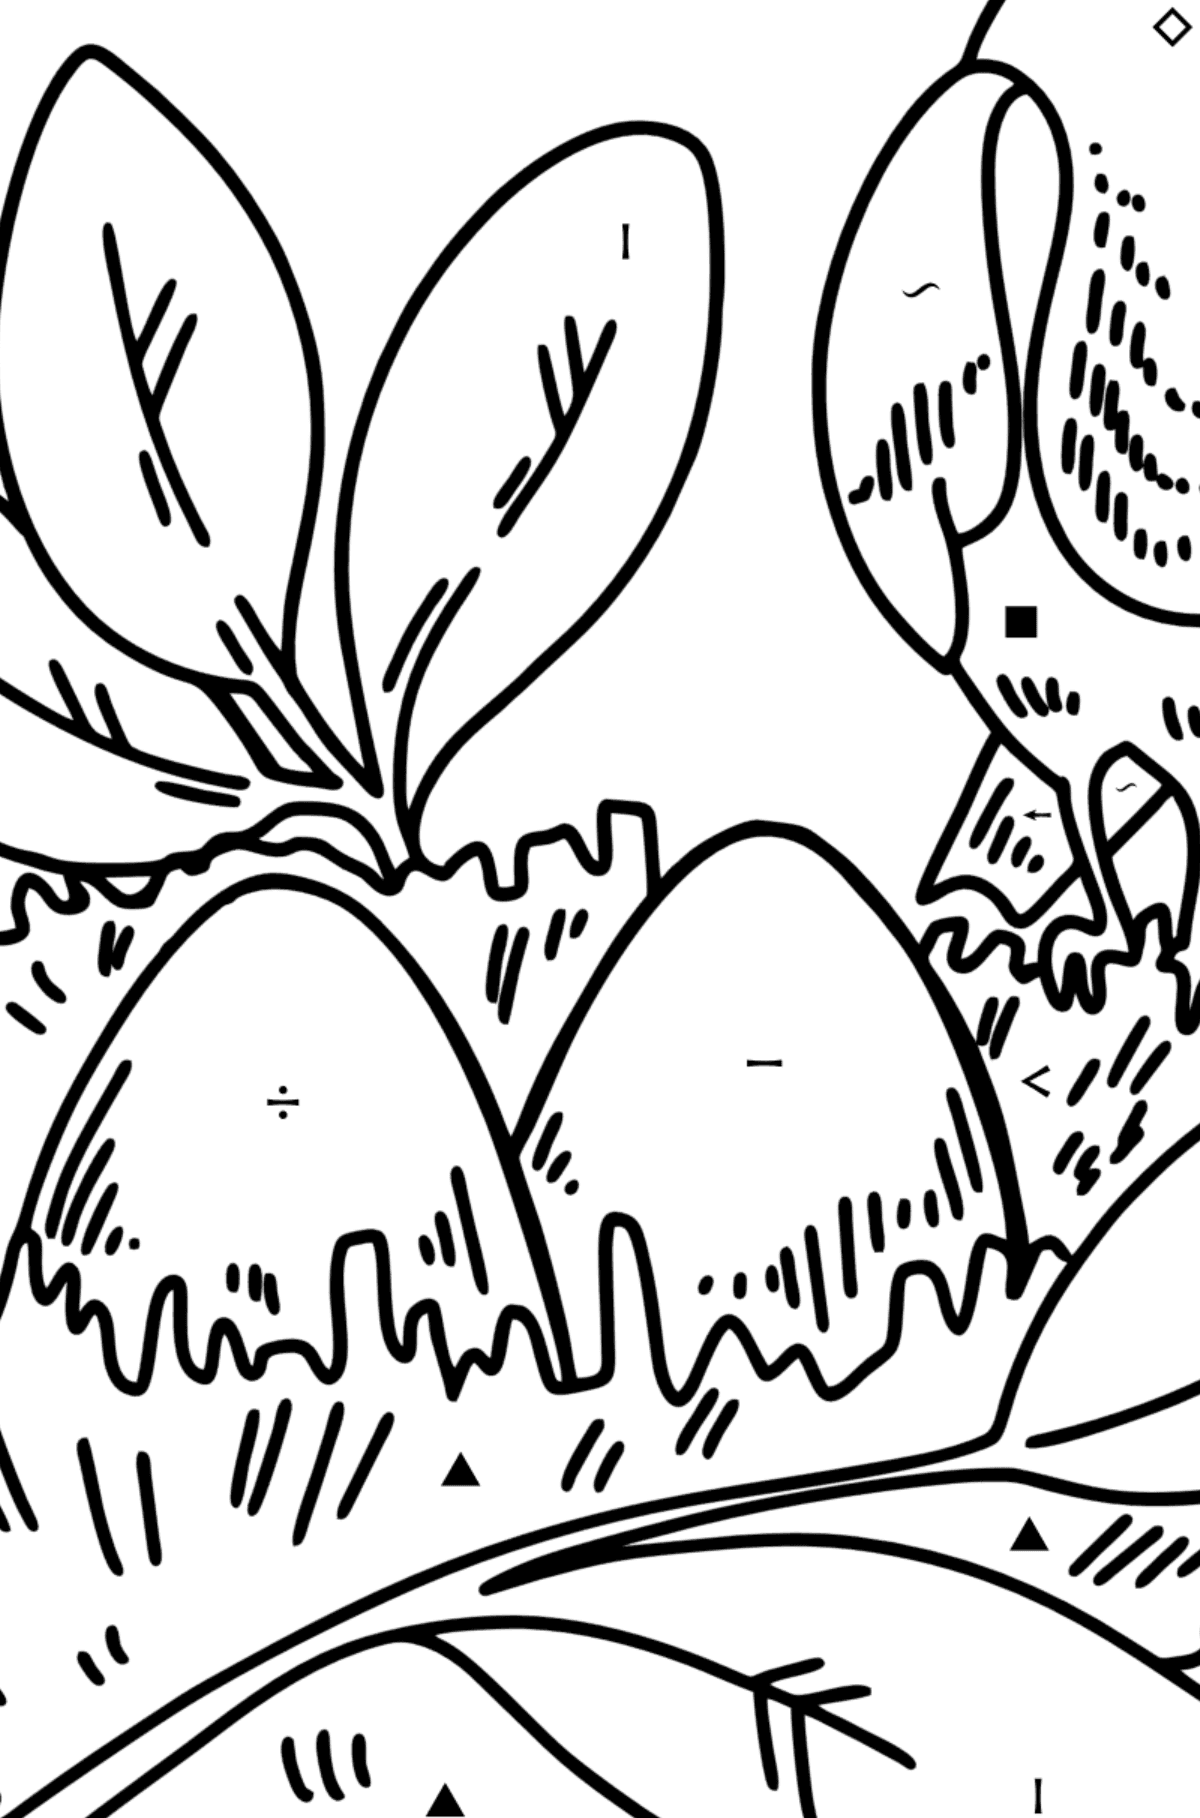 Coloring page - Thrush Nest - Coloring by Symbols for Kids